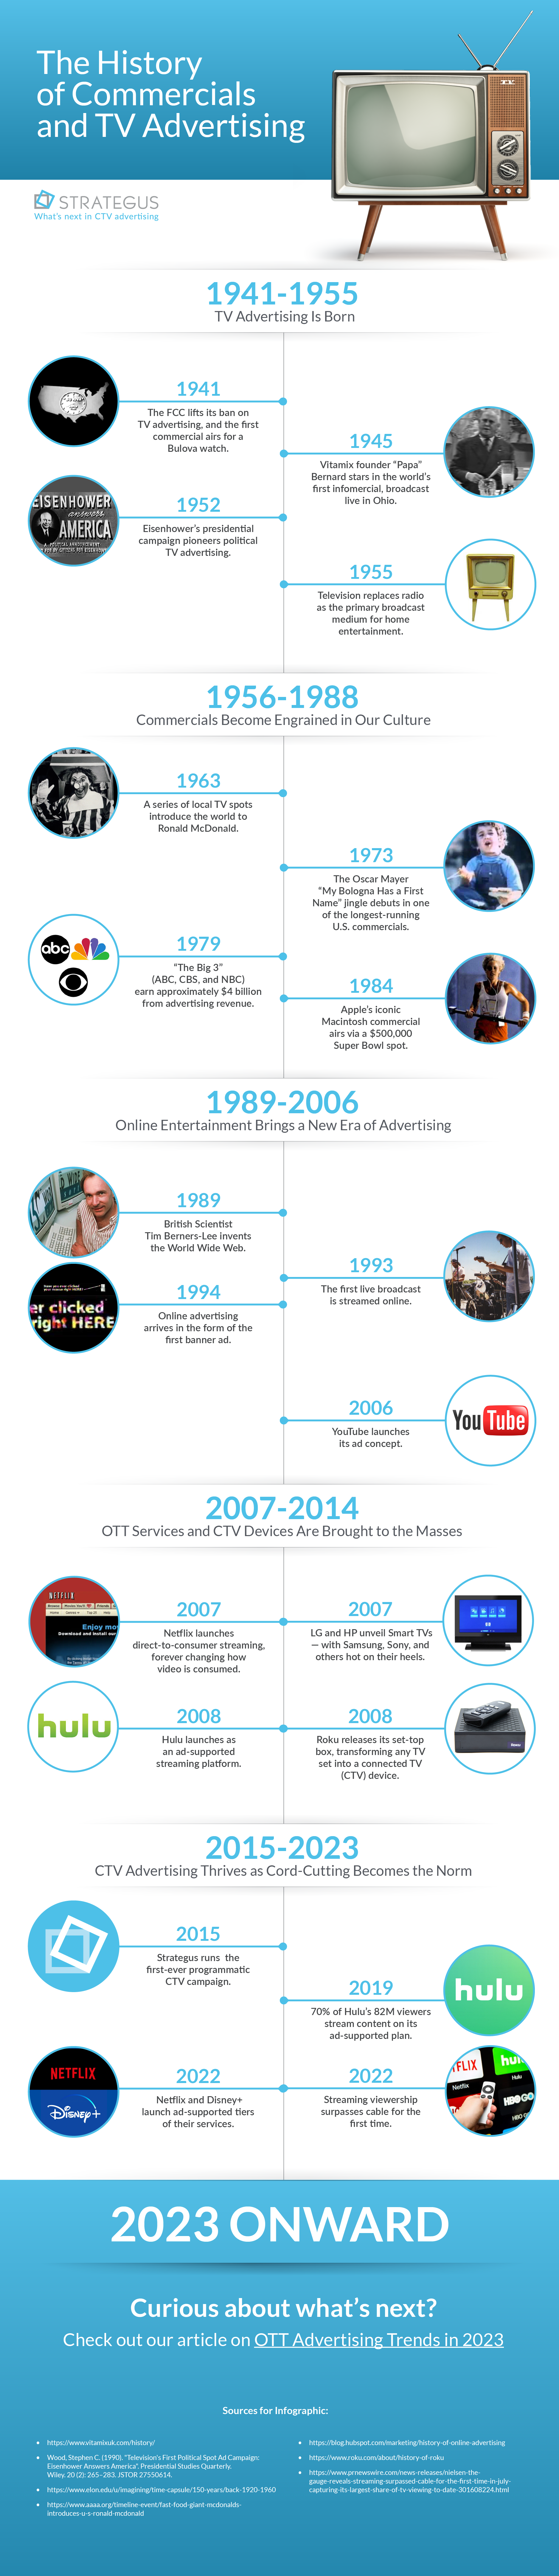 Infographic showing the history of TV advertising from when the first commercial ran in 1941 to the new ways commercials are being delivered today using CTV and OTT advertising tactics.